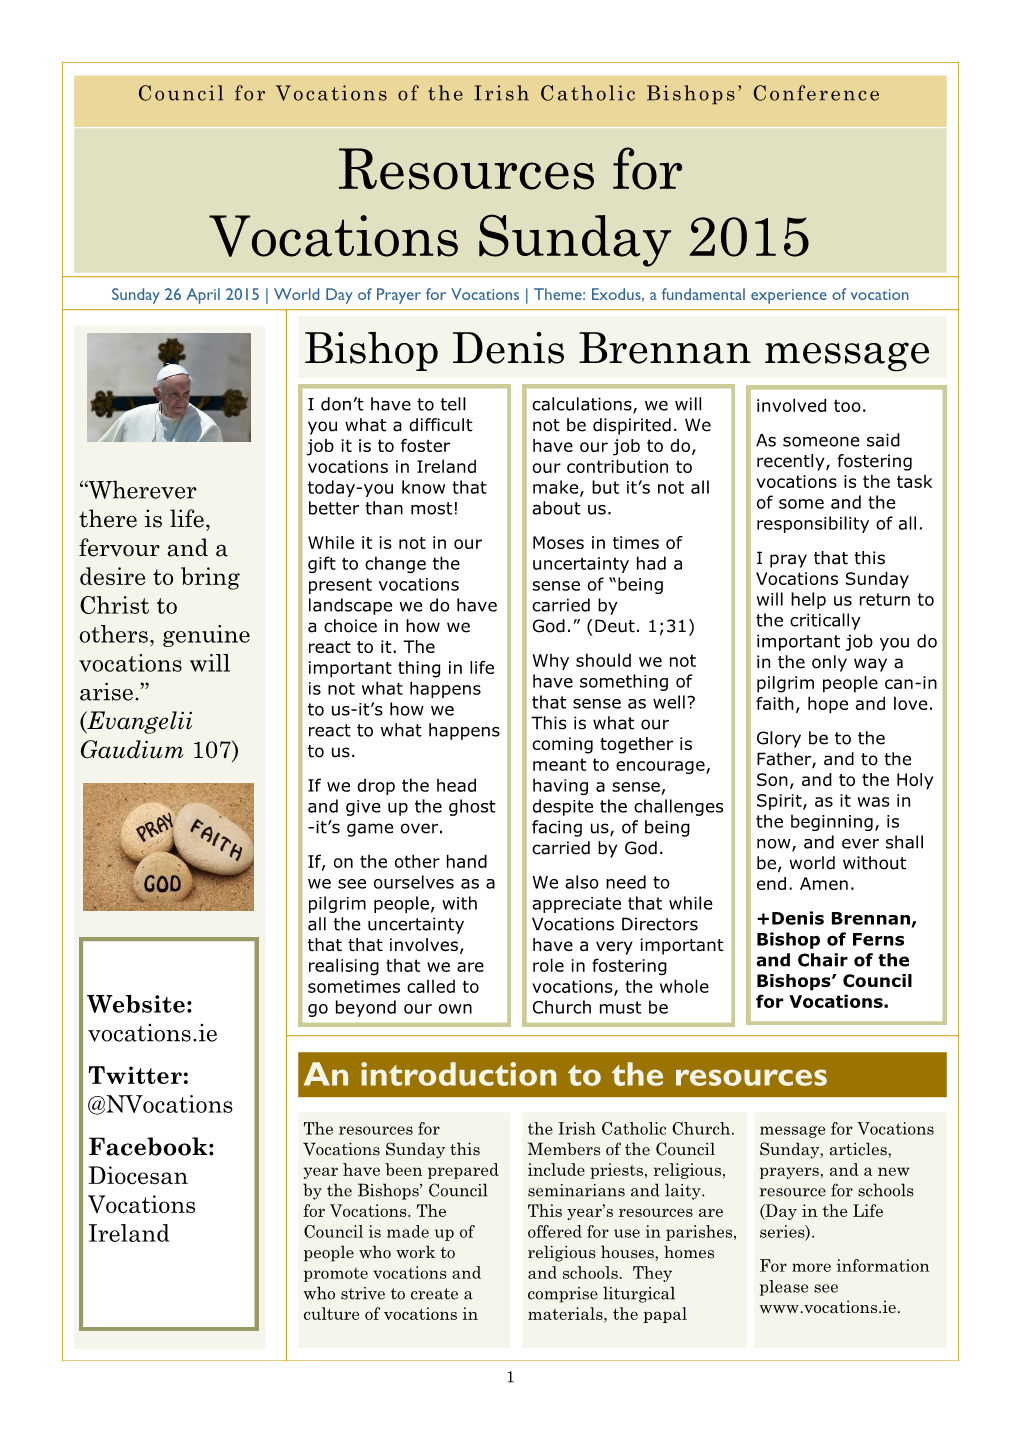 Resources for Vocations Sunday 2015